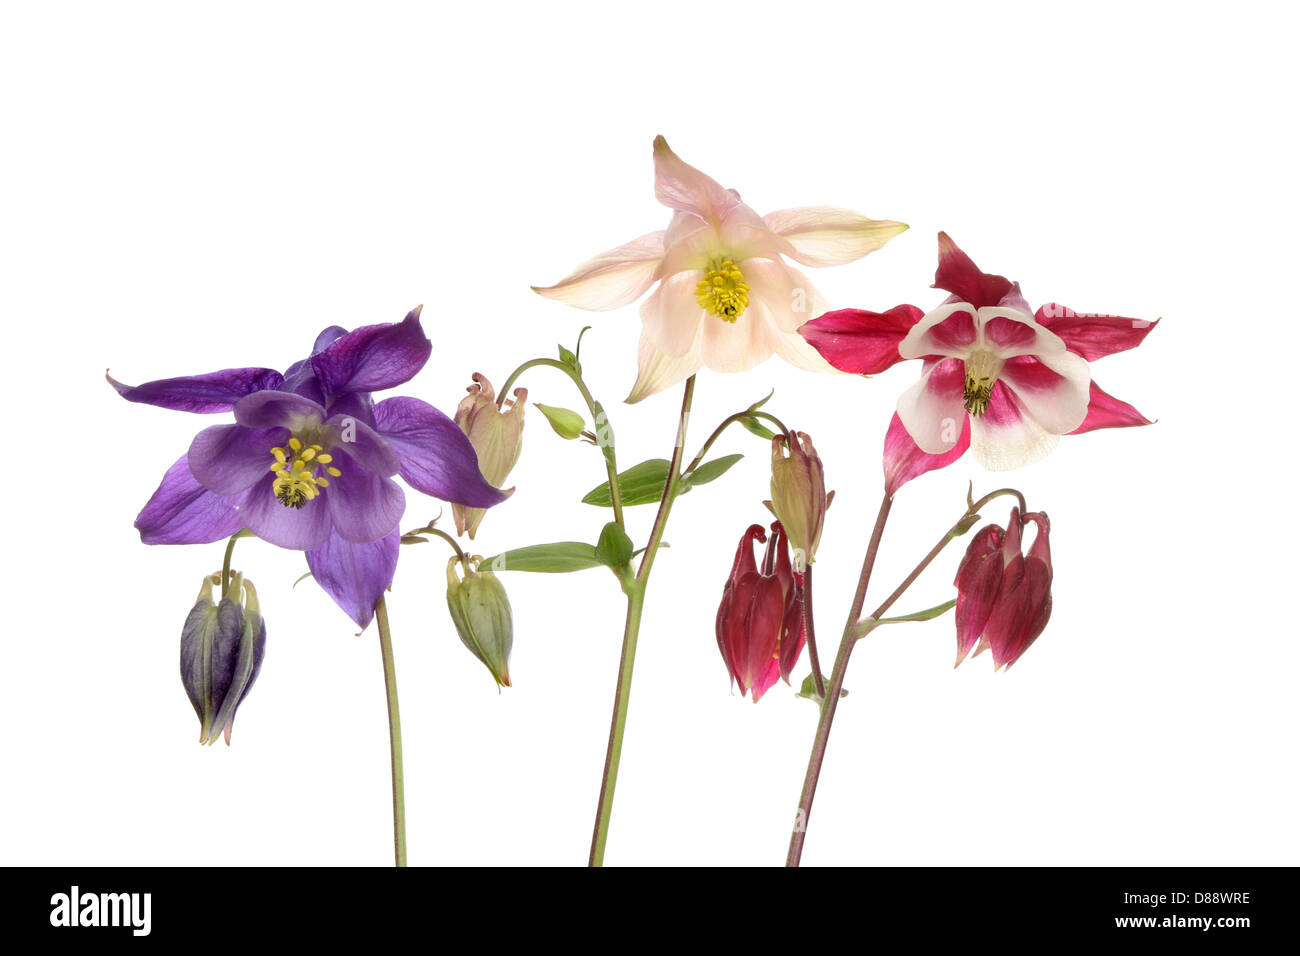 Group of three aquilegia flowers isolated against white Stock Photo